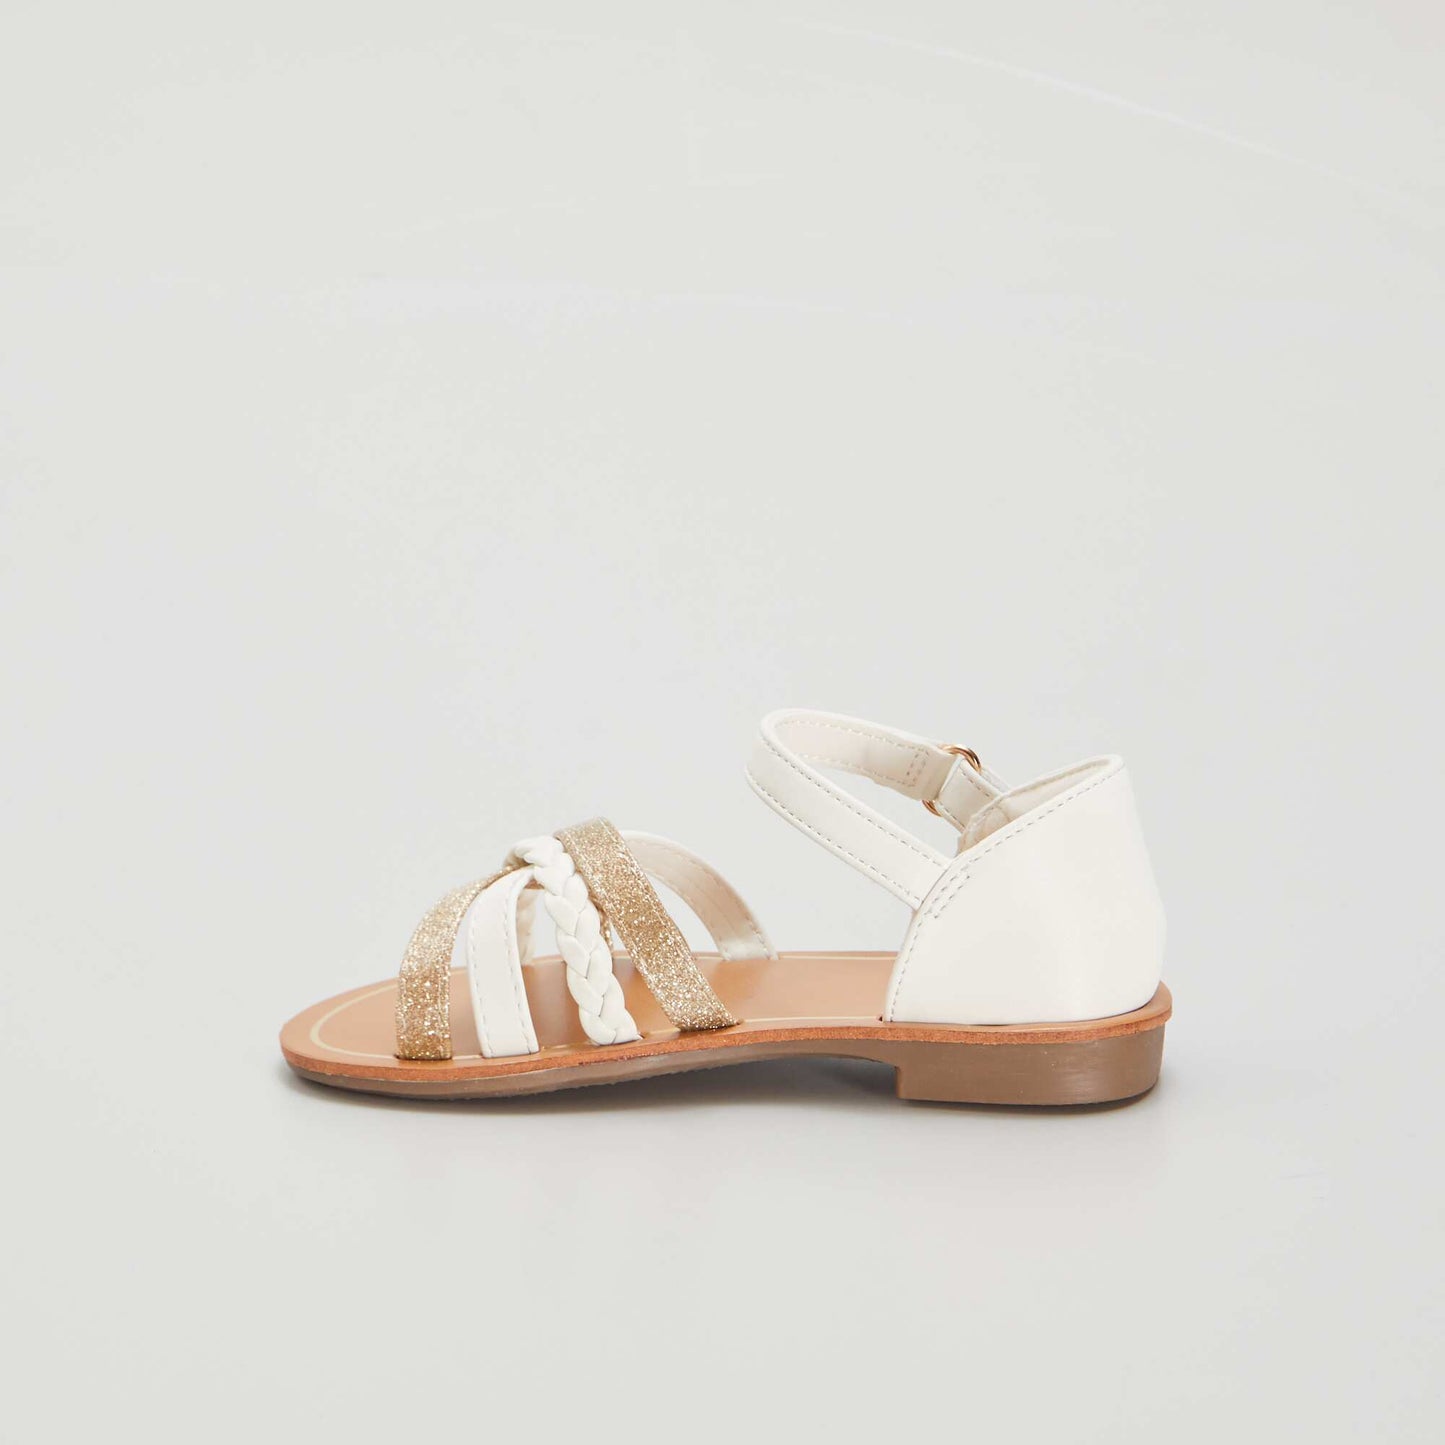 Sandals with stylish straps white